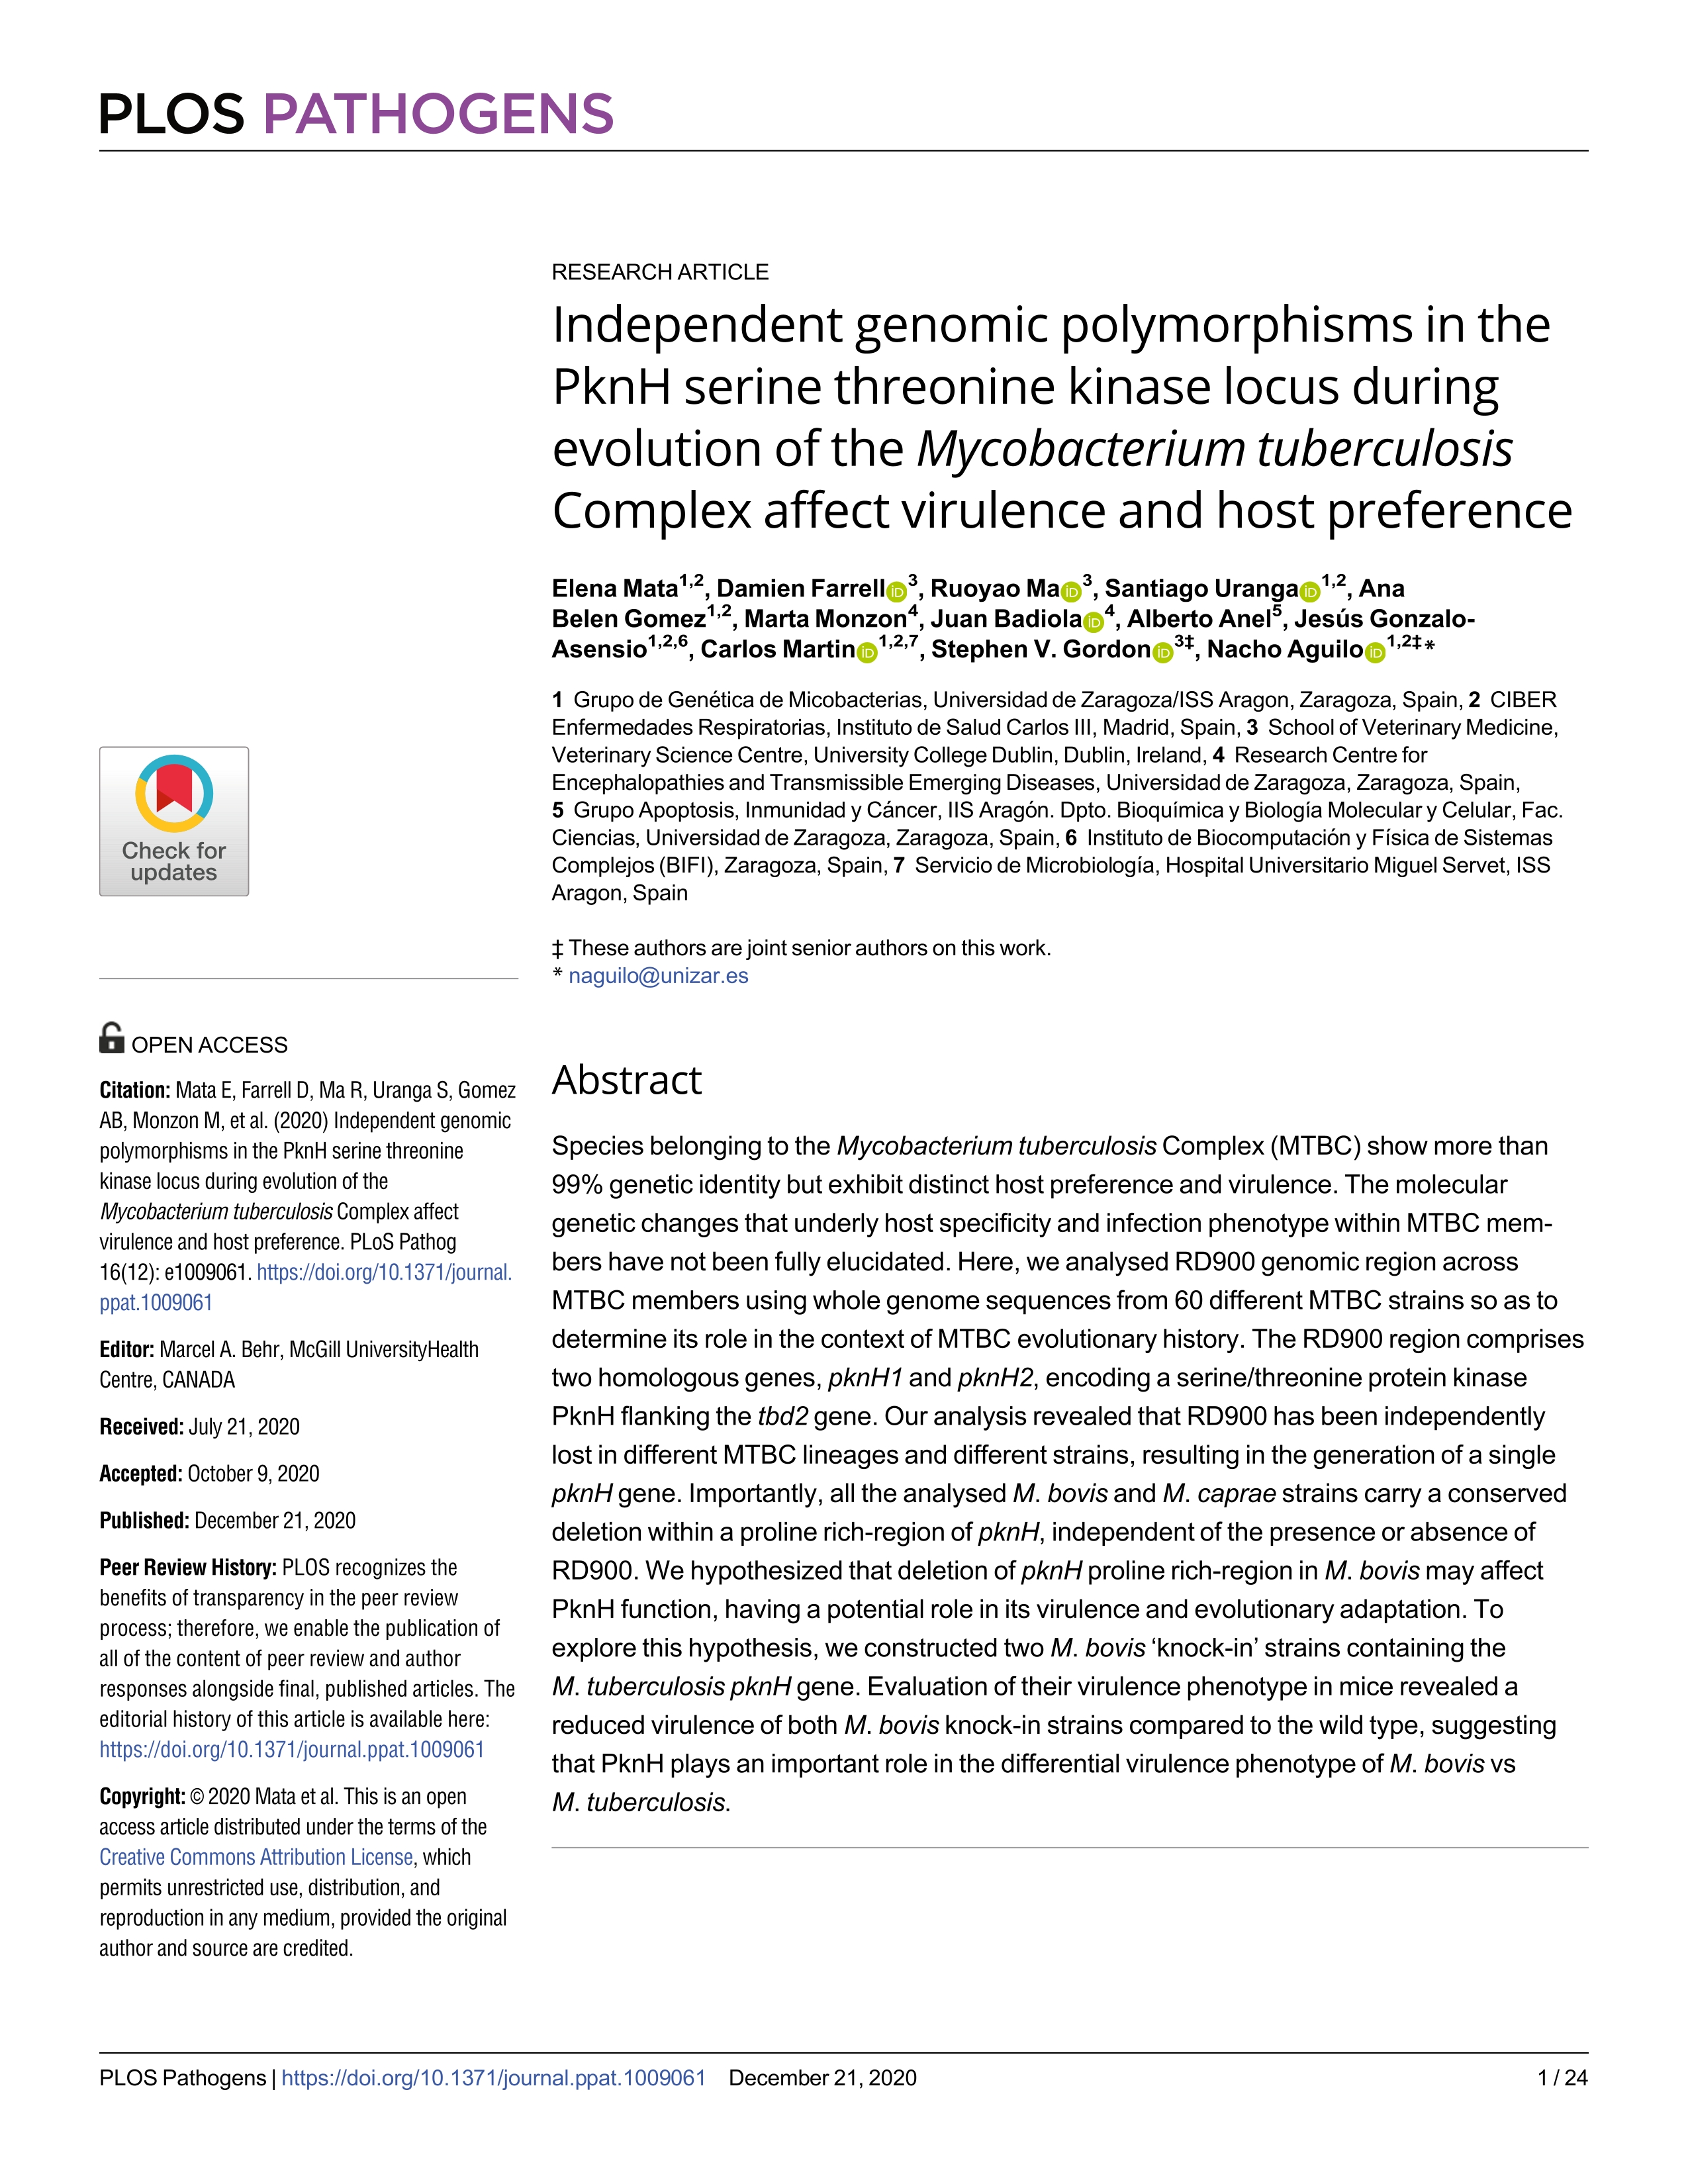 Independent genomic polymorphisms in the PknH serine threonine kinase locus during evolution of the Mycobacterium tuberculosis Complex affect virulence and host preference